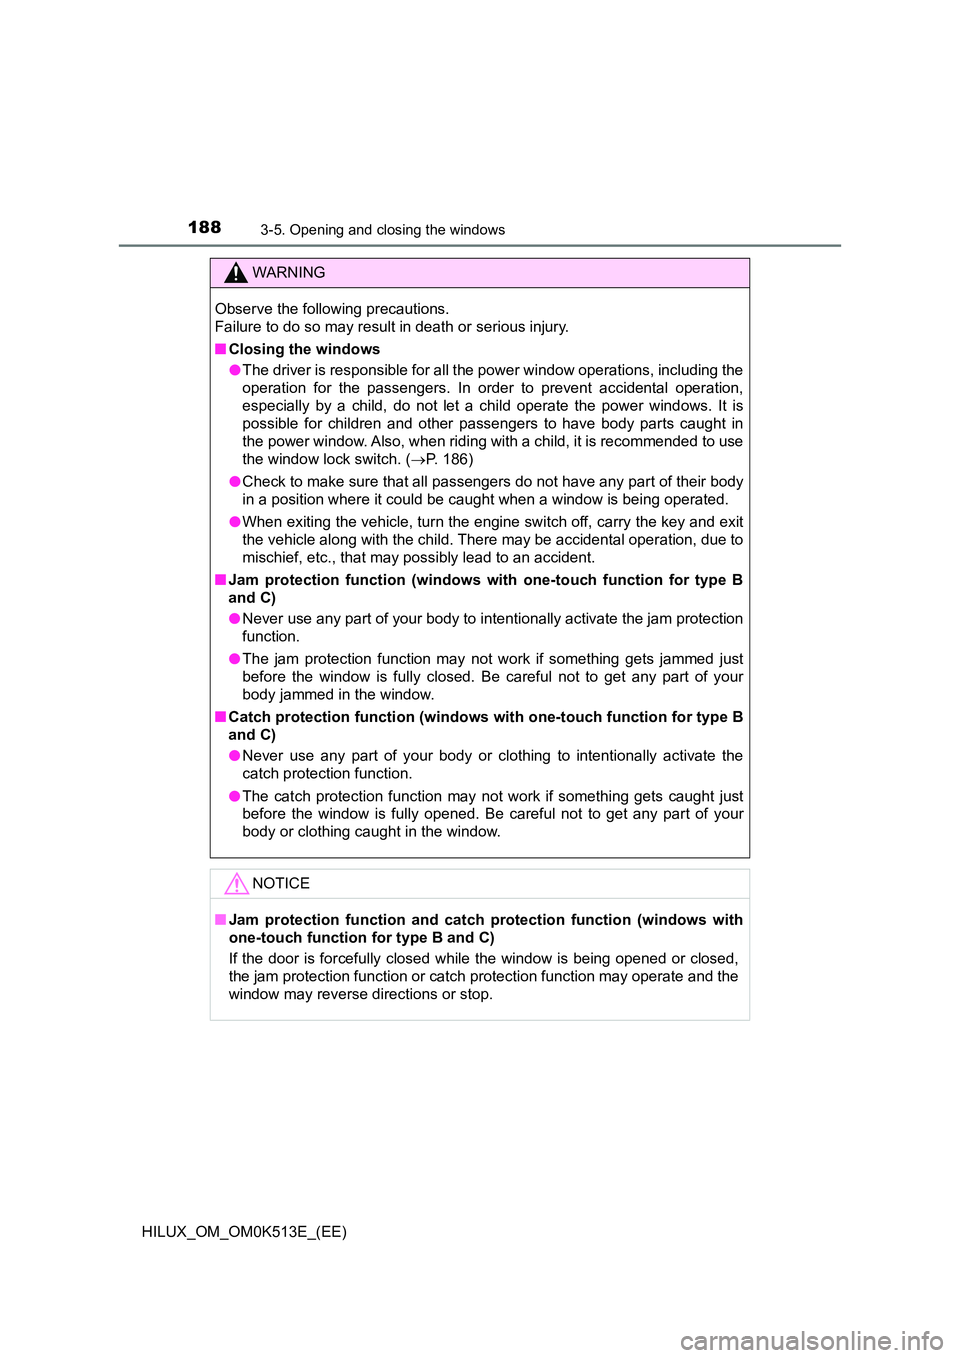 TOYOTA HILUX 2021   (in English) User Guide 1883-5. Opening and closing the windows
HILUX_OM_OM0K513E_(EE)
WARNING
Observe the following precautions.  
Failure to do so may result in death or serious injury. 
�Q Closing the windows 
�O The driv